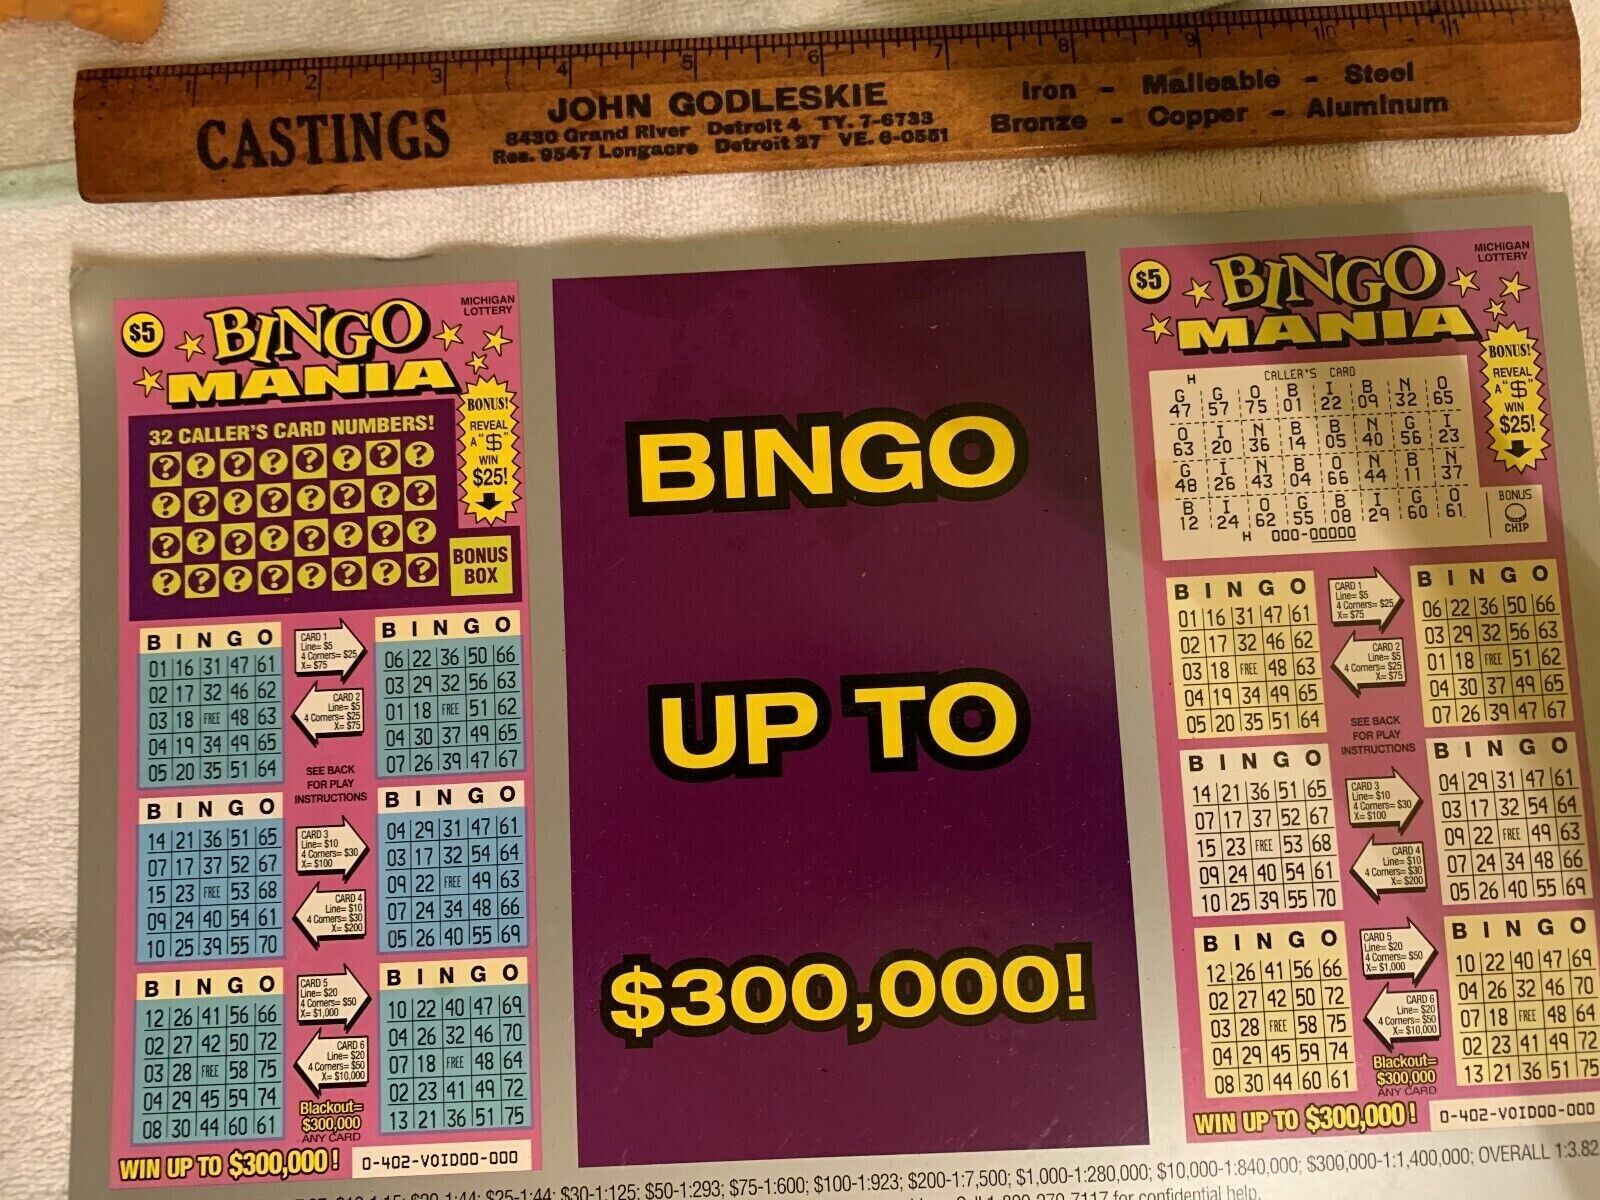 BINGO MANIA UP TO $300,000 LOTTERY GAMES SIGN MICHIGAN VERY RARE VINTAGE